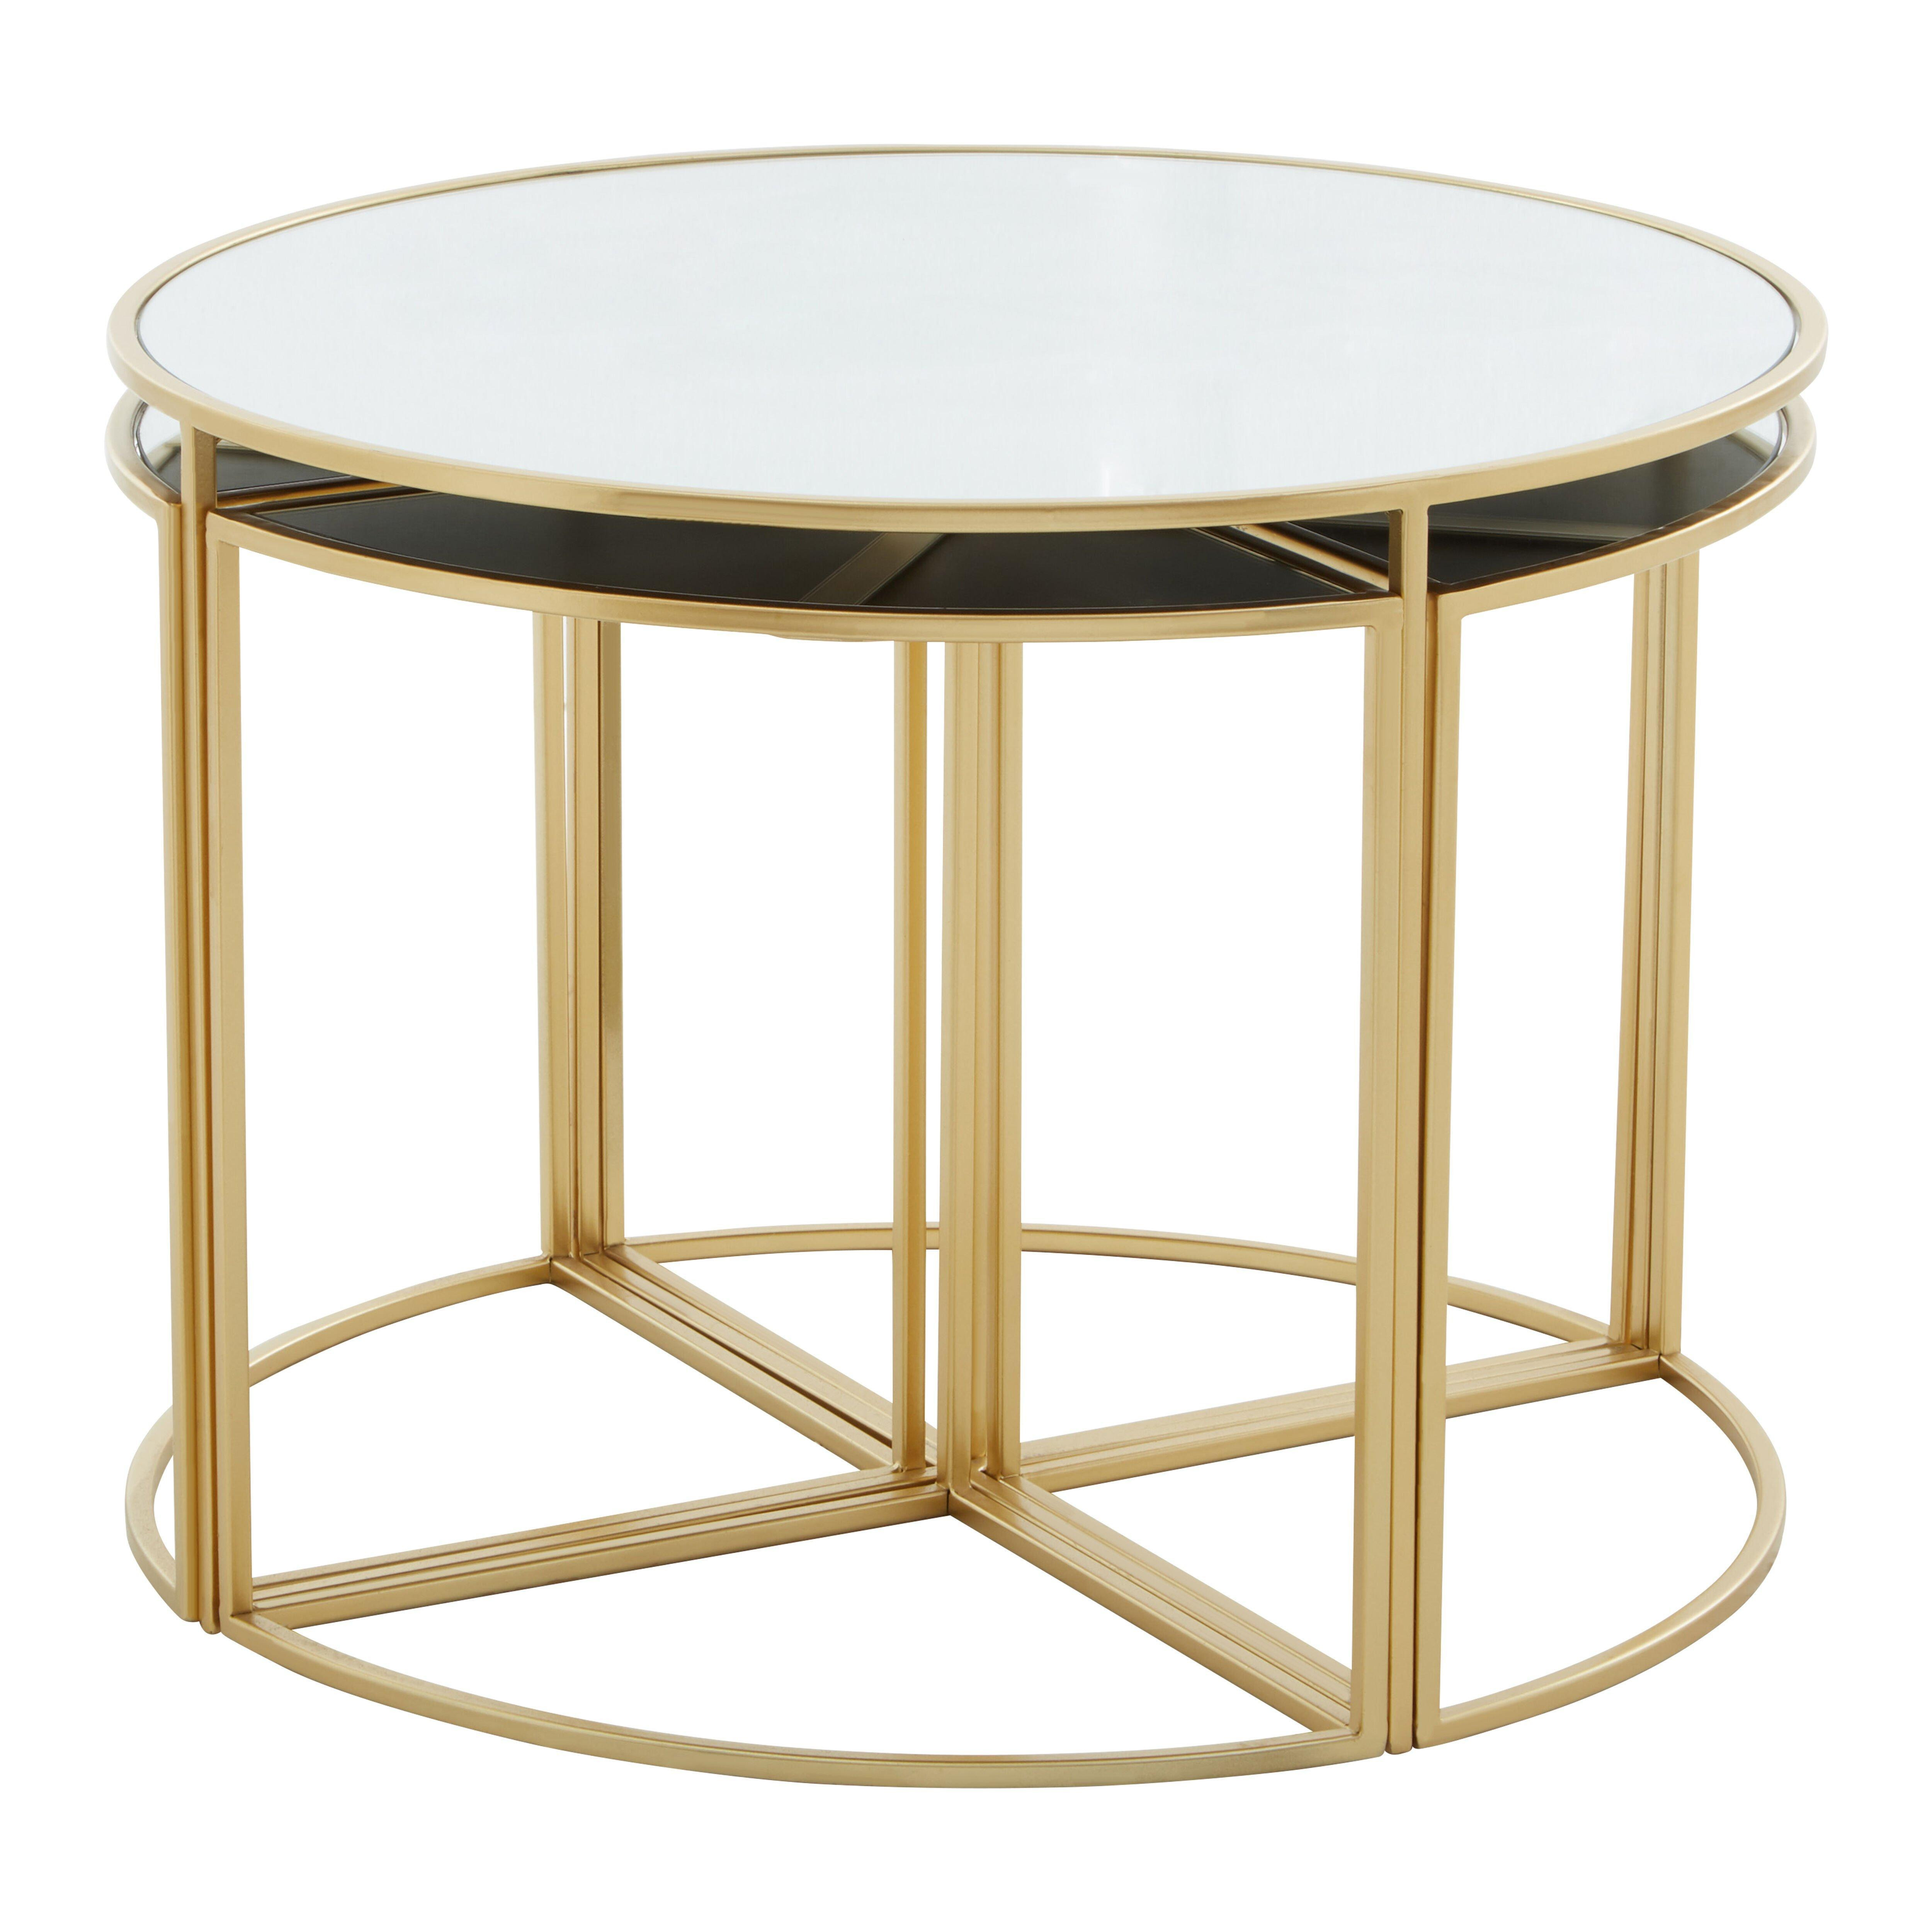 Jolie 5 Piece Mirrored Top Nesting Tables Set with Gold Frame - image 1